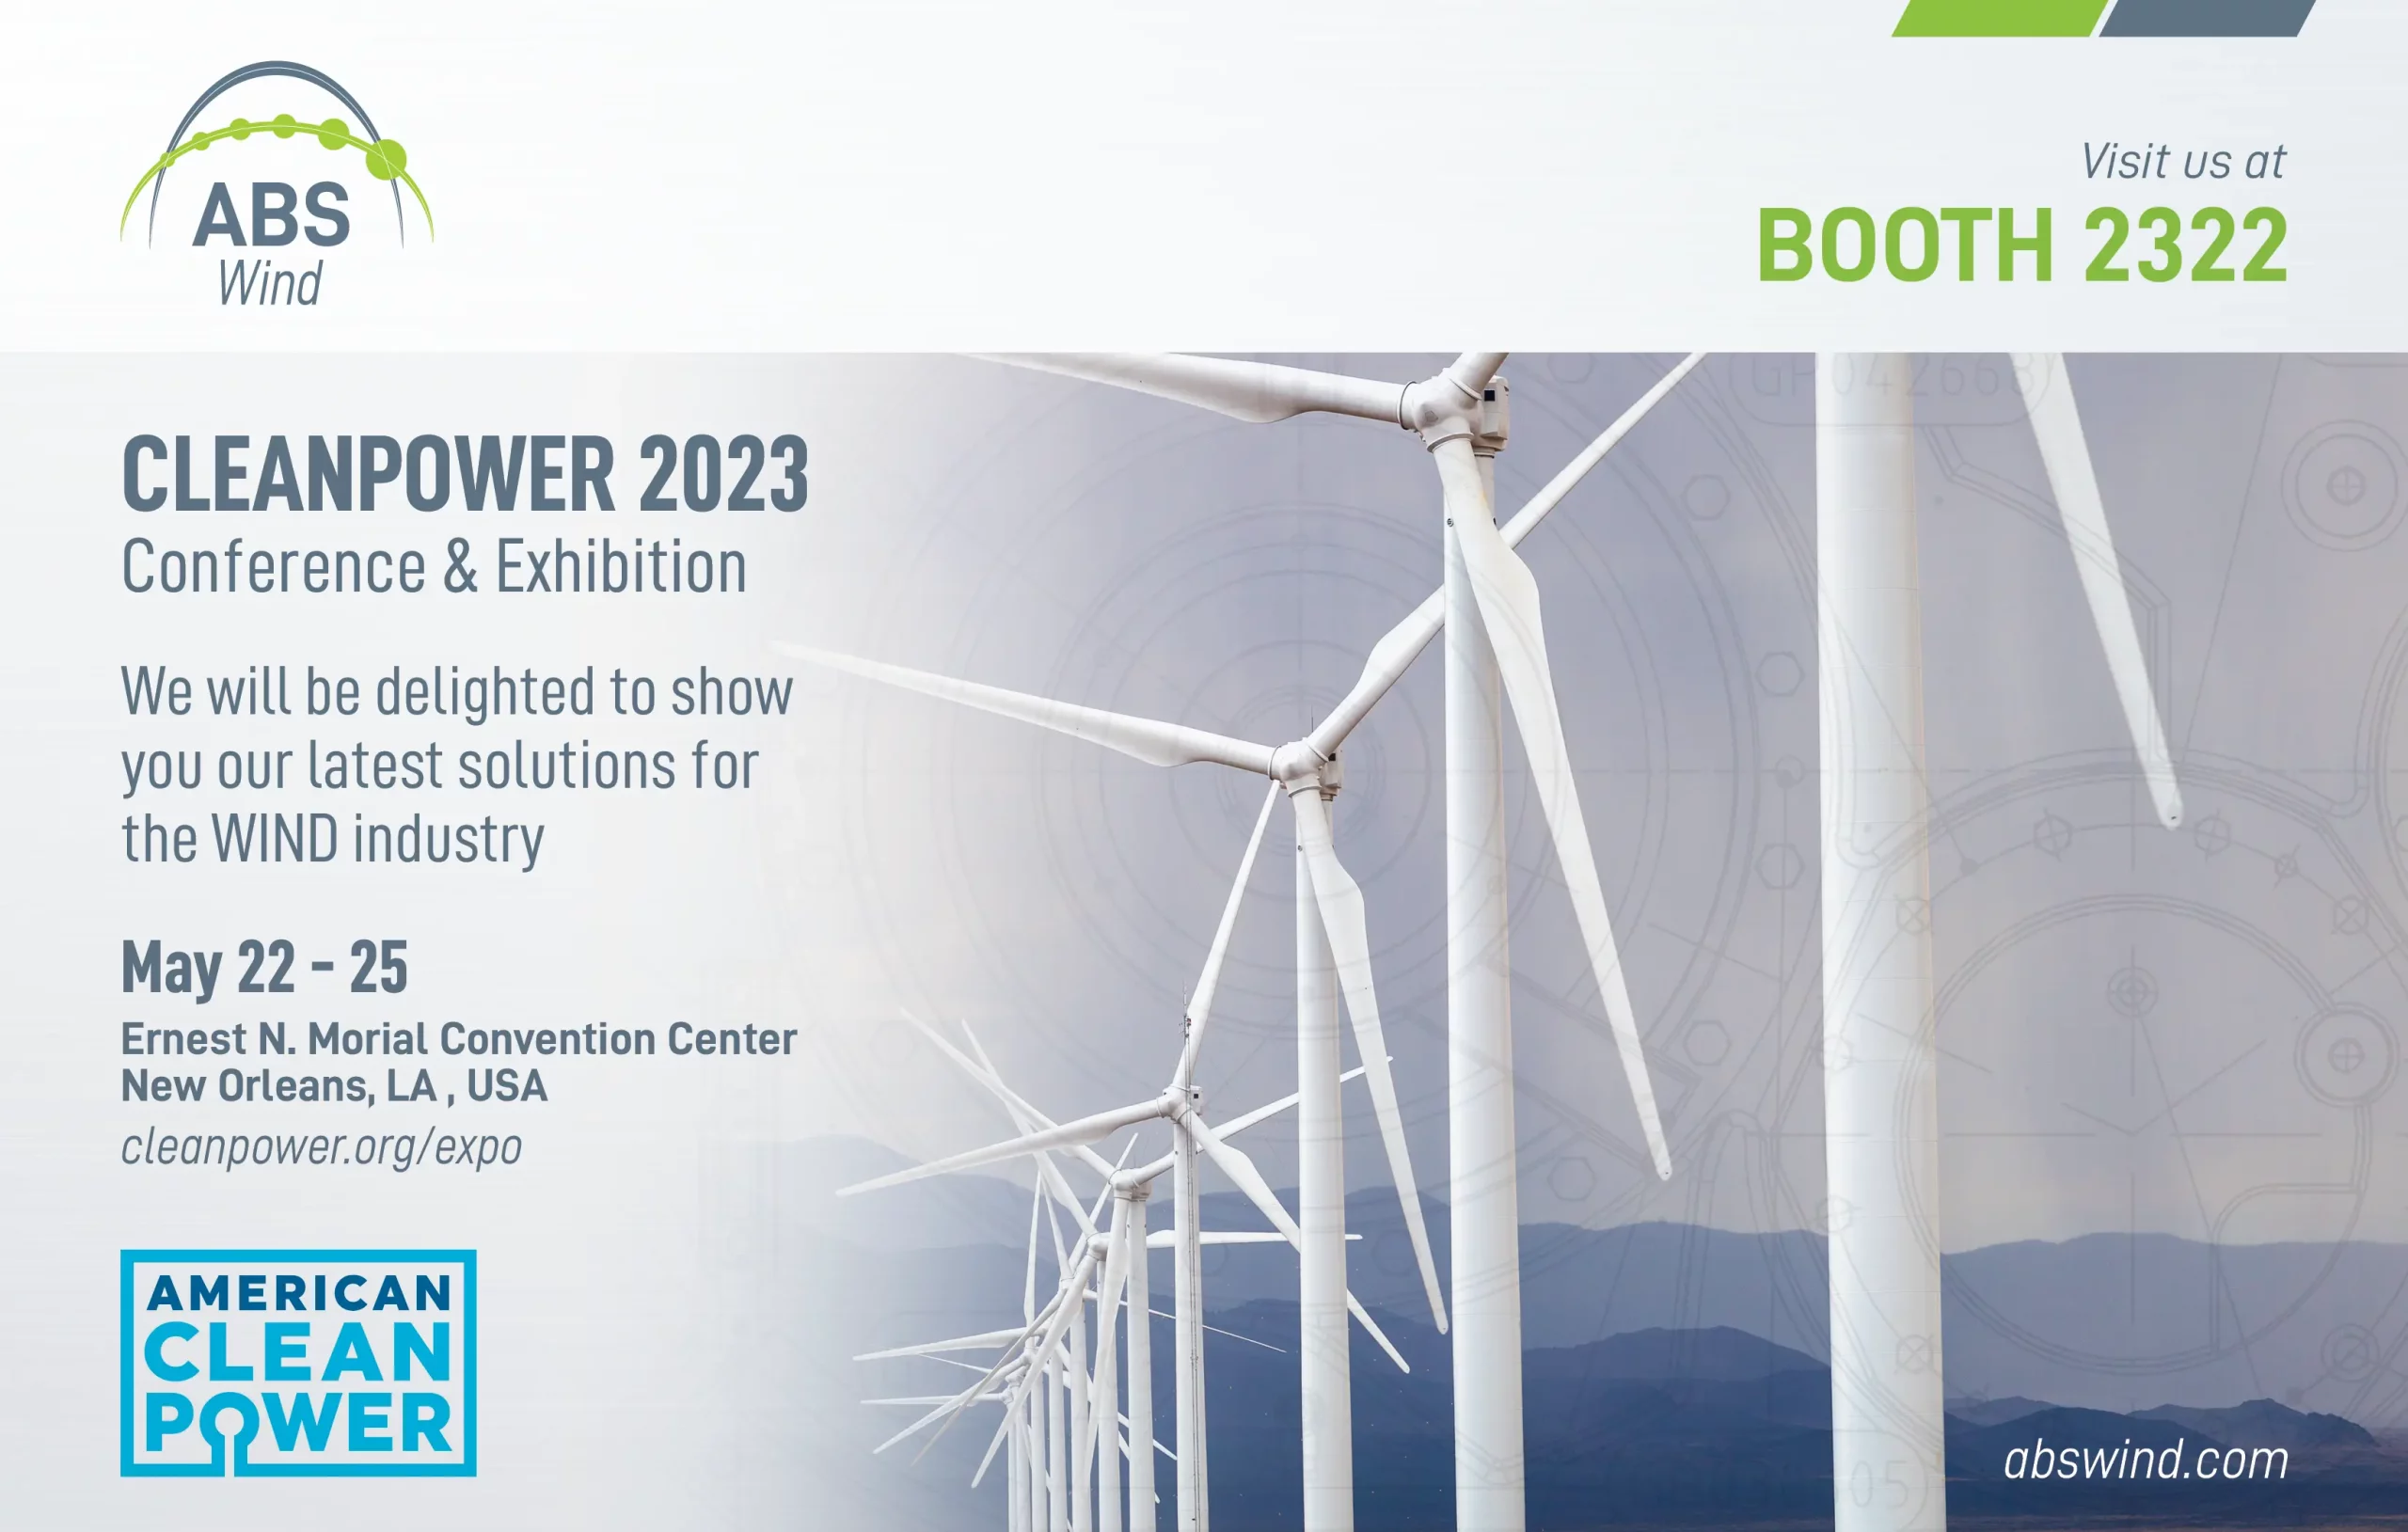 ABS WIND CLEANPOWER INVITE 2023